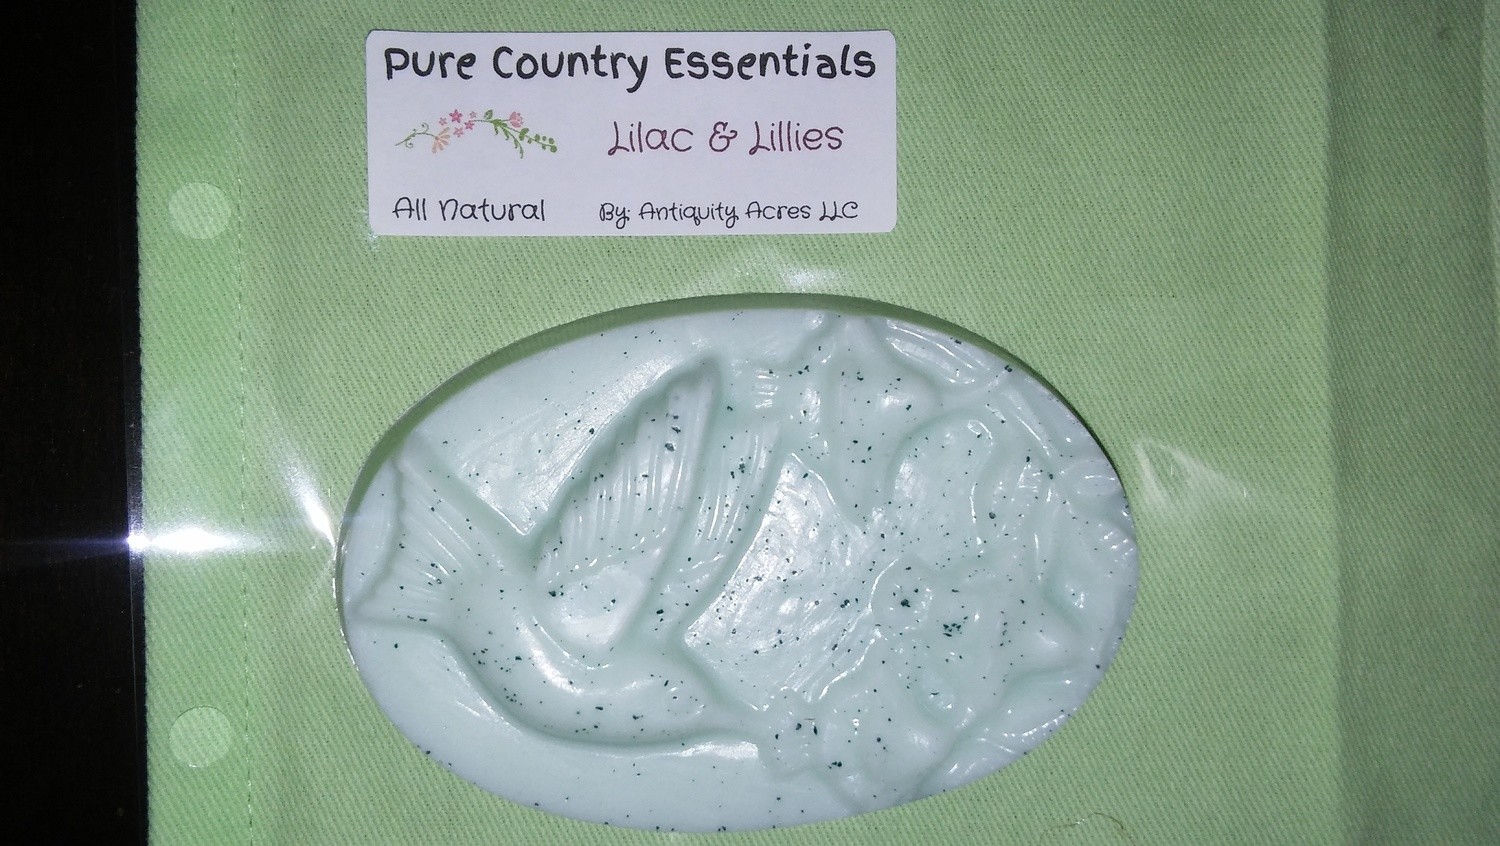 Pure Country Essentials Soap, Castile All Natural Glycerin, Lilac & Lillies Fragrance, Oval Hummingbird Design